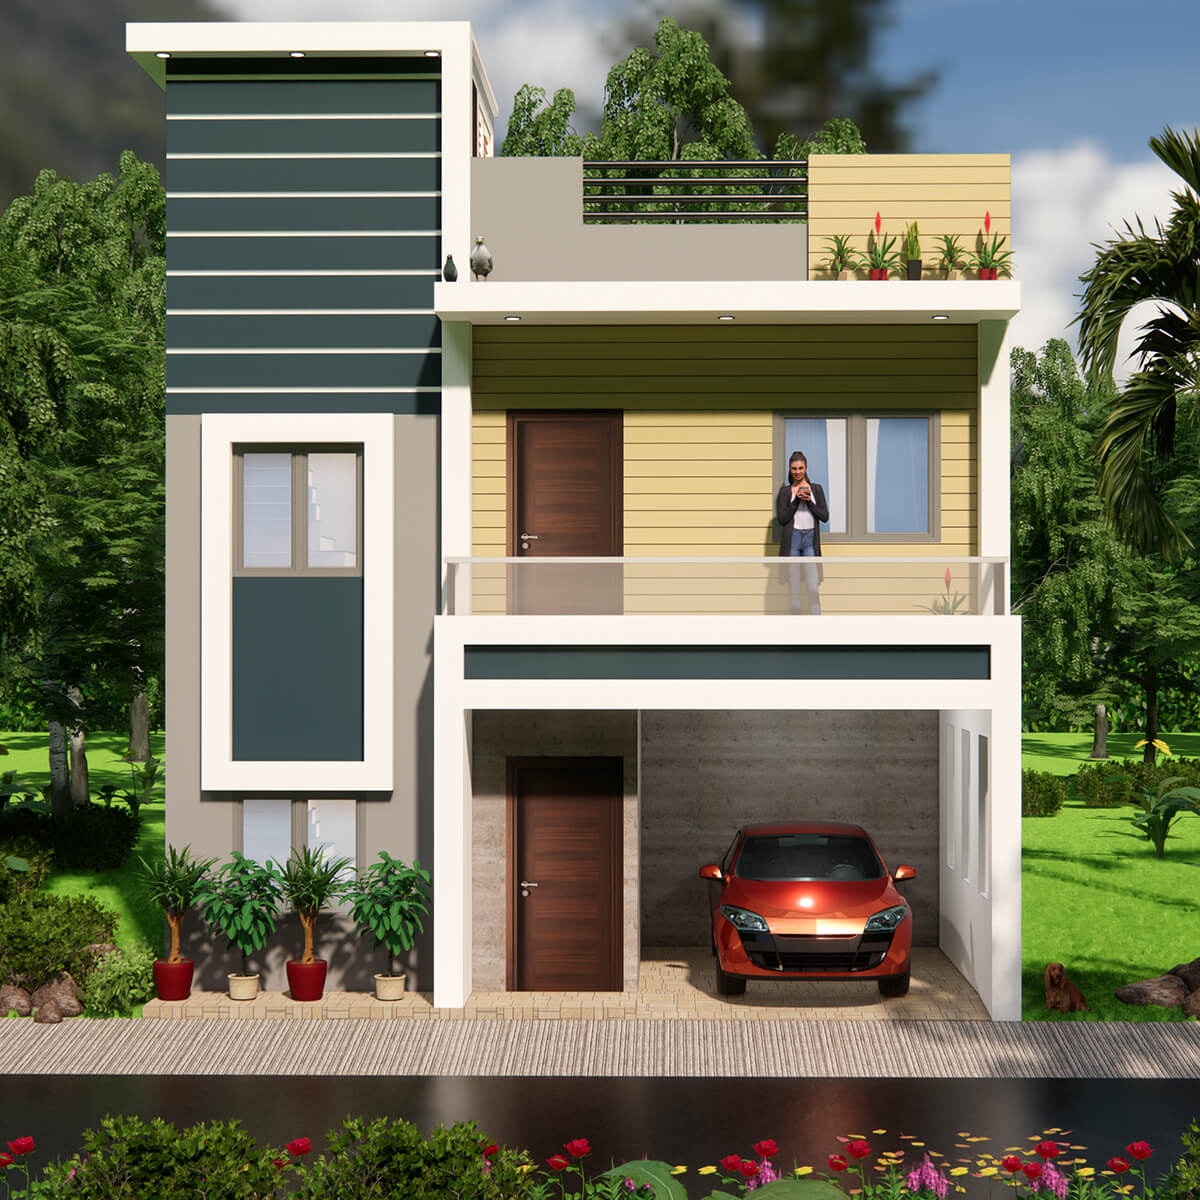 25X35 Duplex House Design With Interior 2BHK House 900 sqf With ...